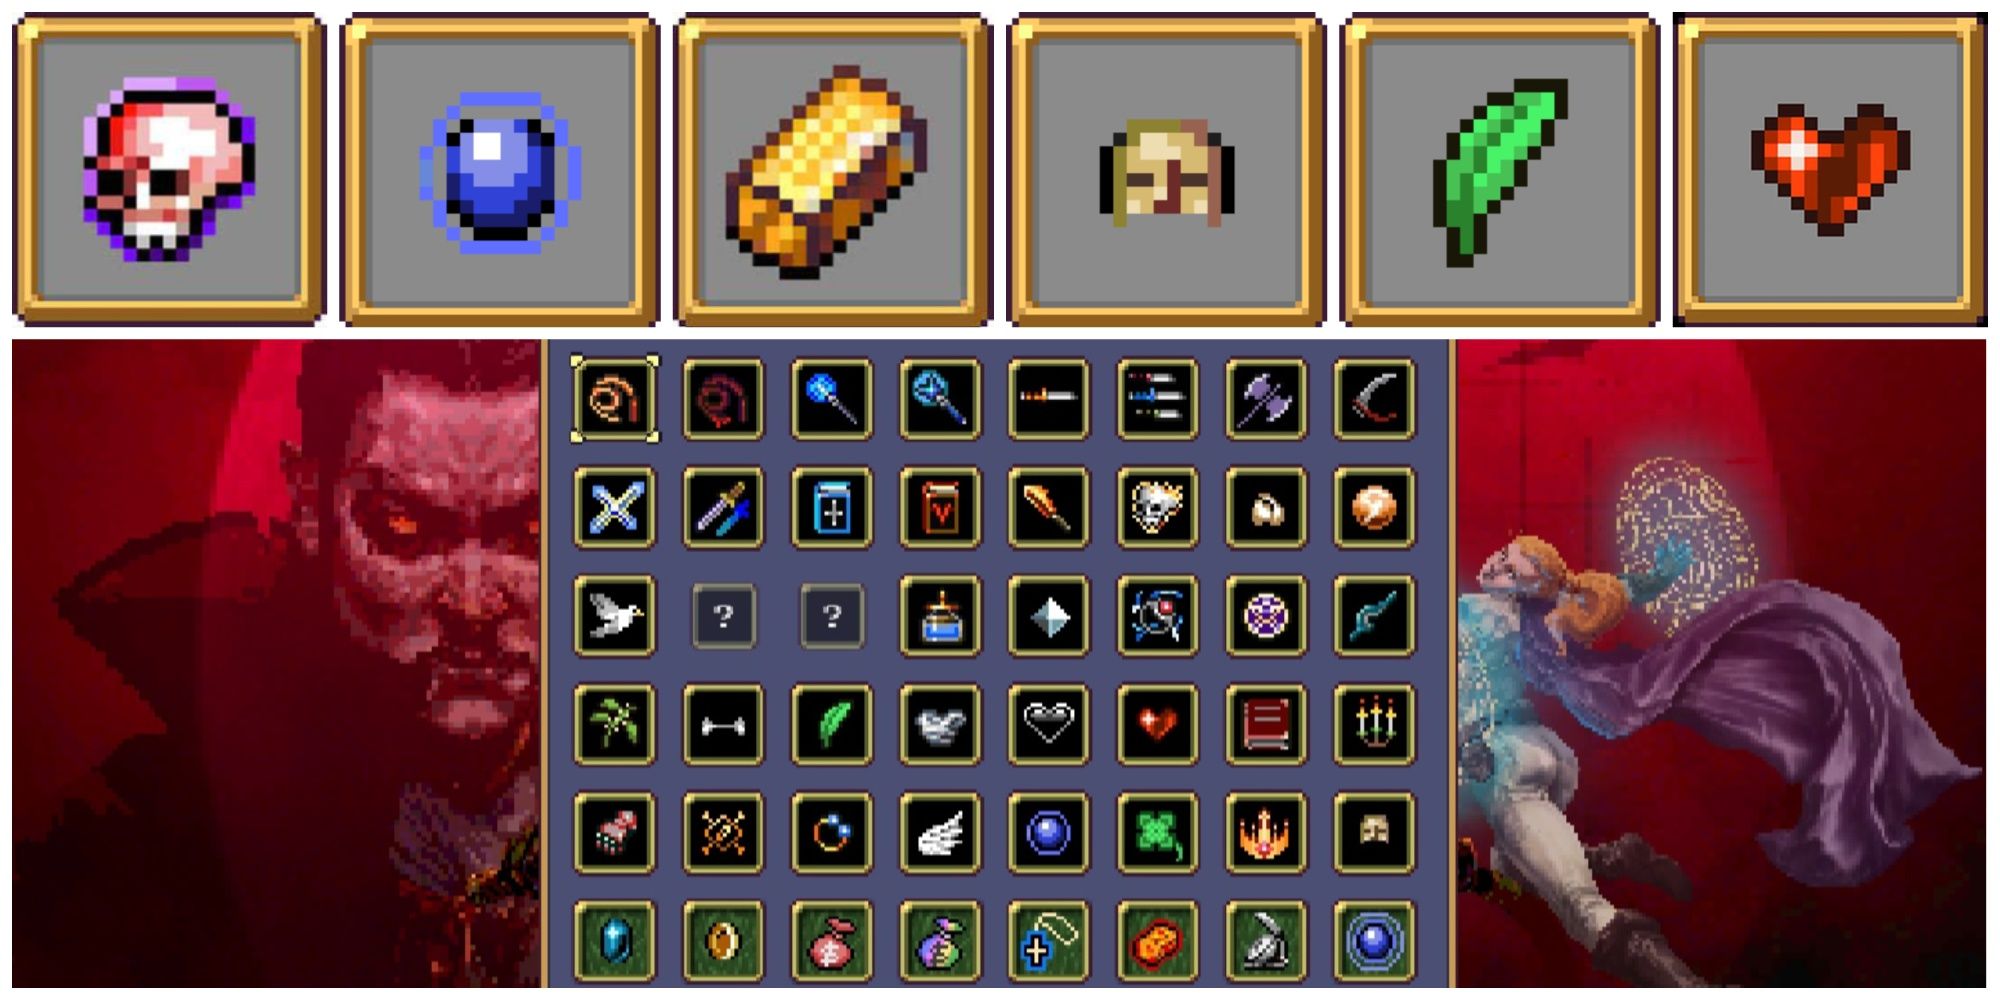 Stone Mask, Attractorb, Spinach and Passive Items in Vampire Survivors